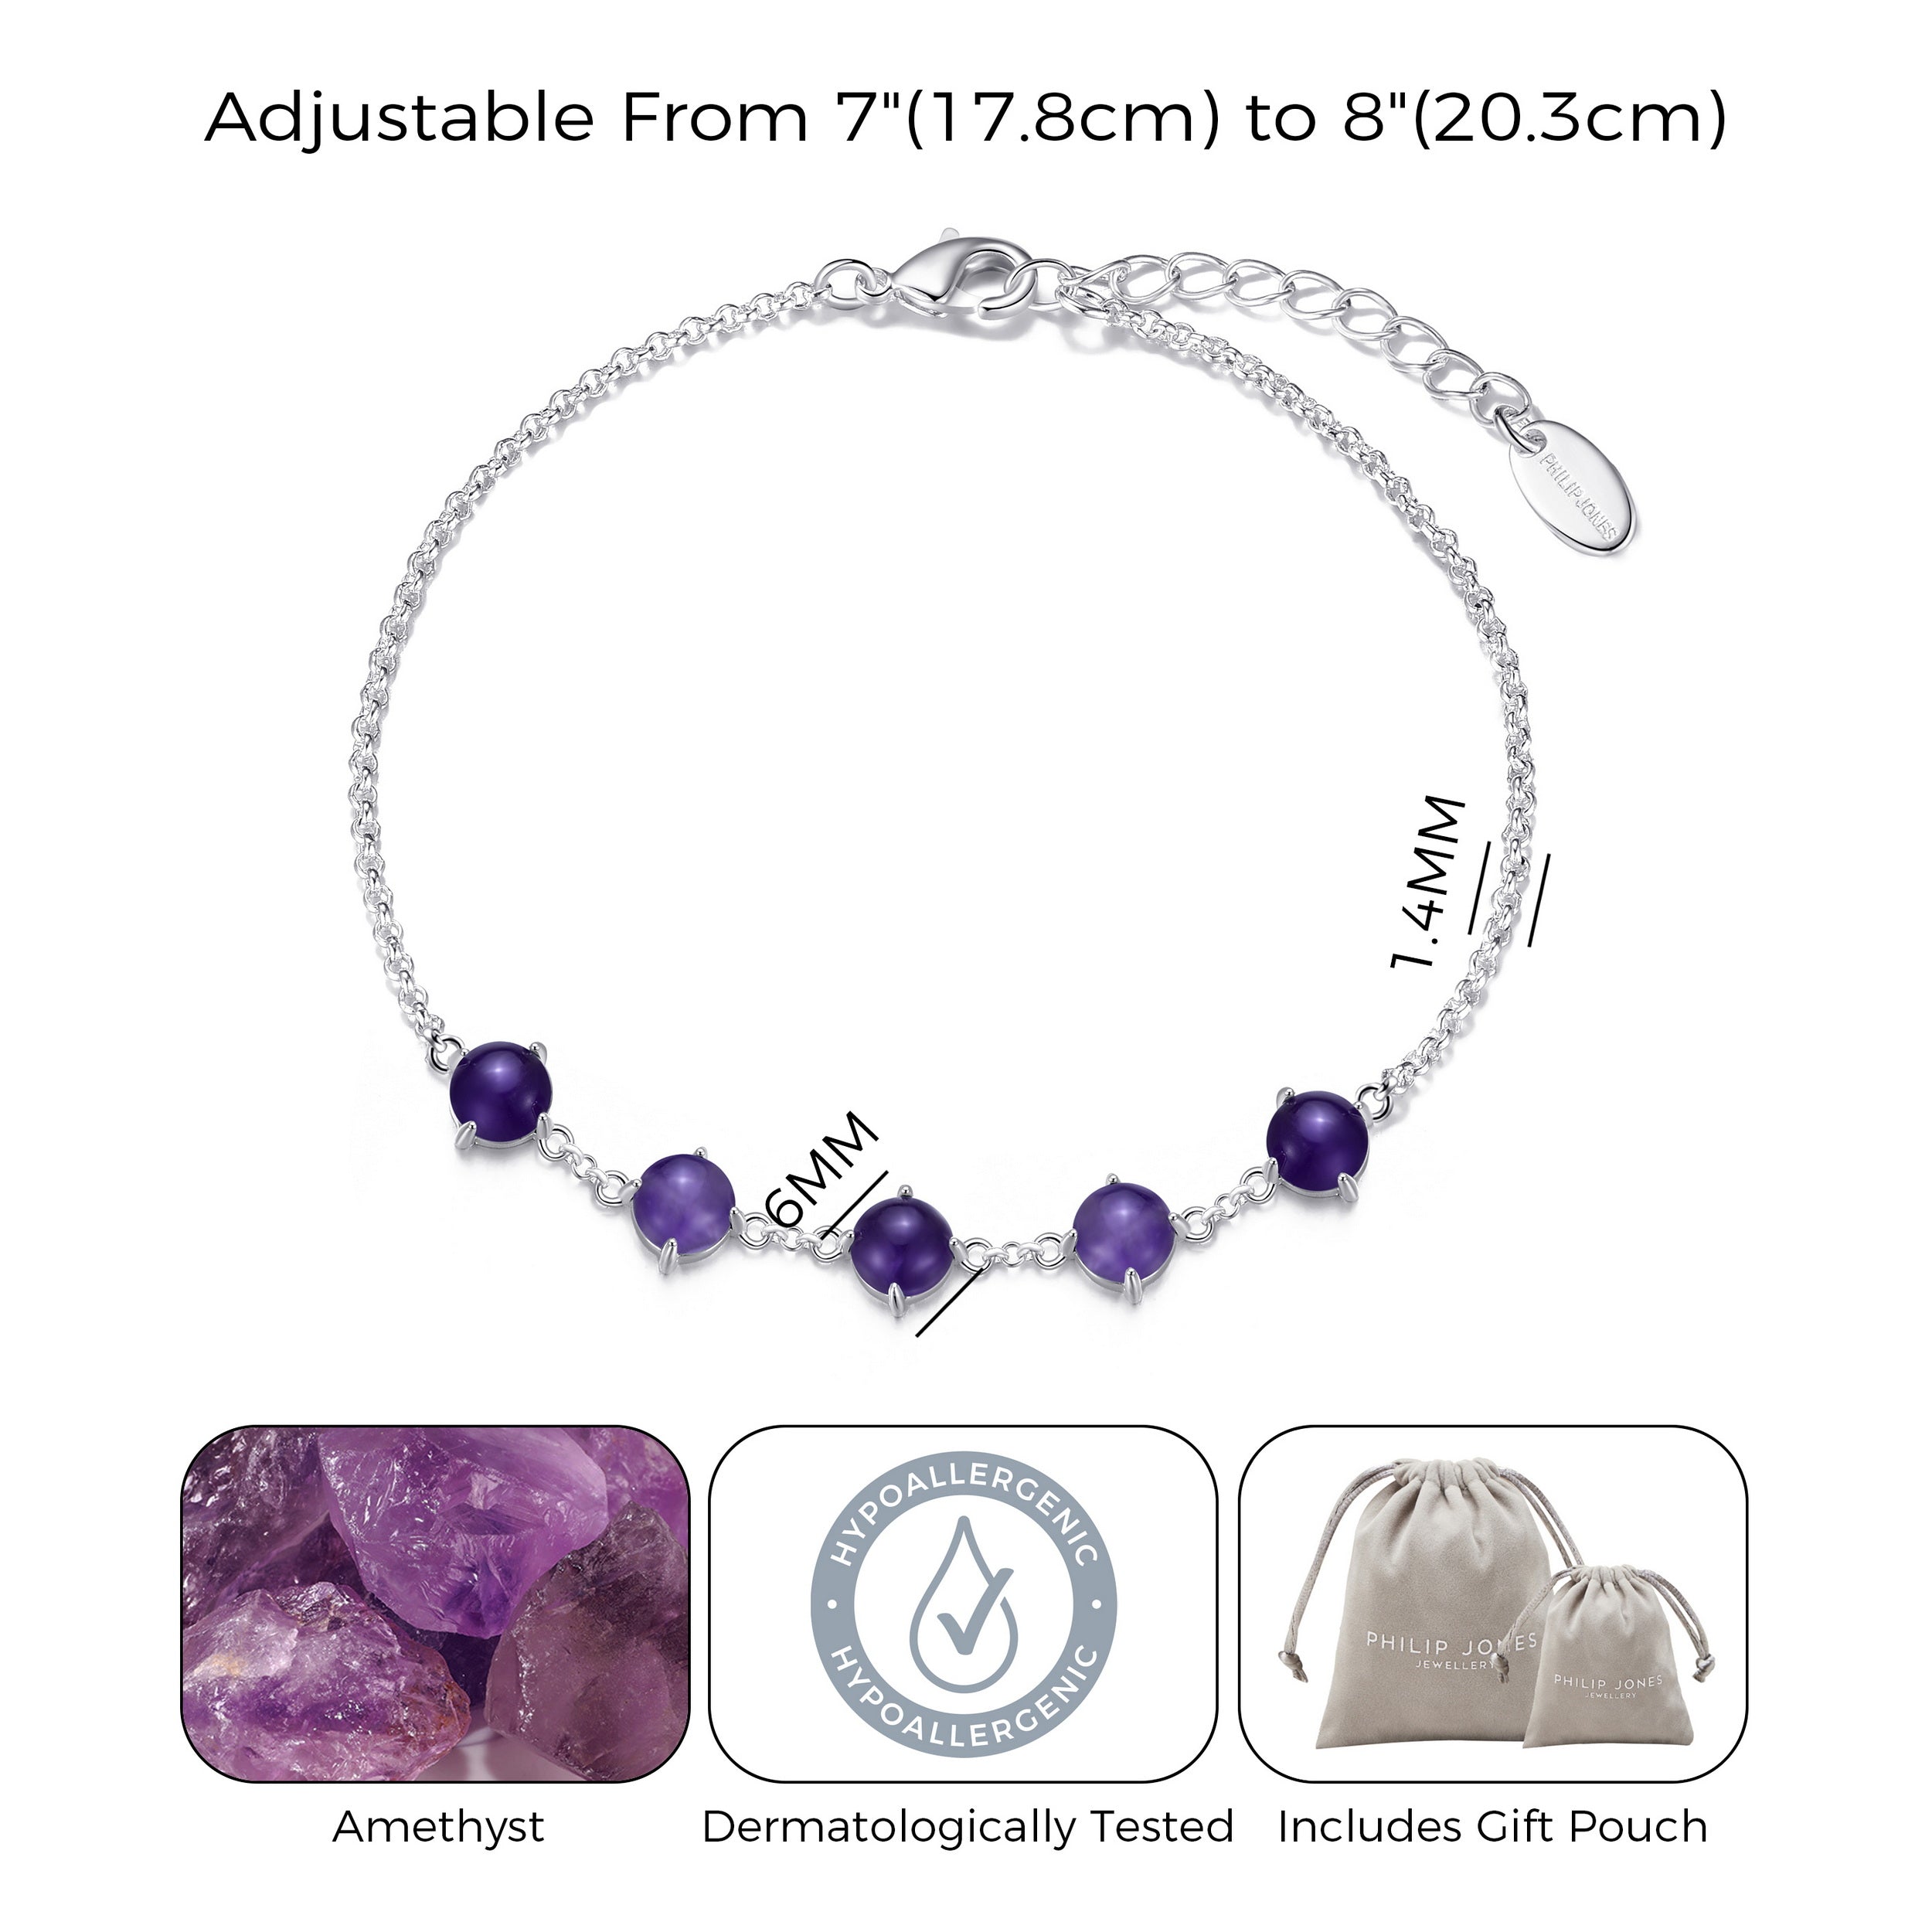 Amethyst Gemstone Bracelet with Quote Card